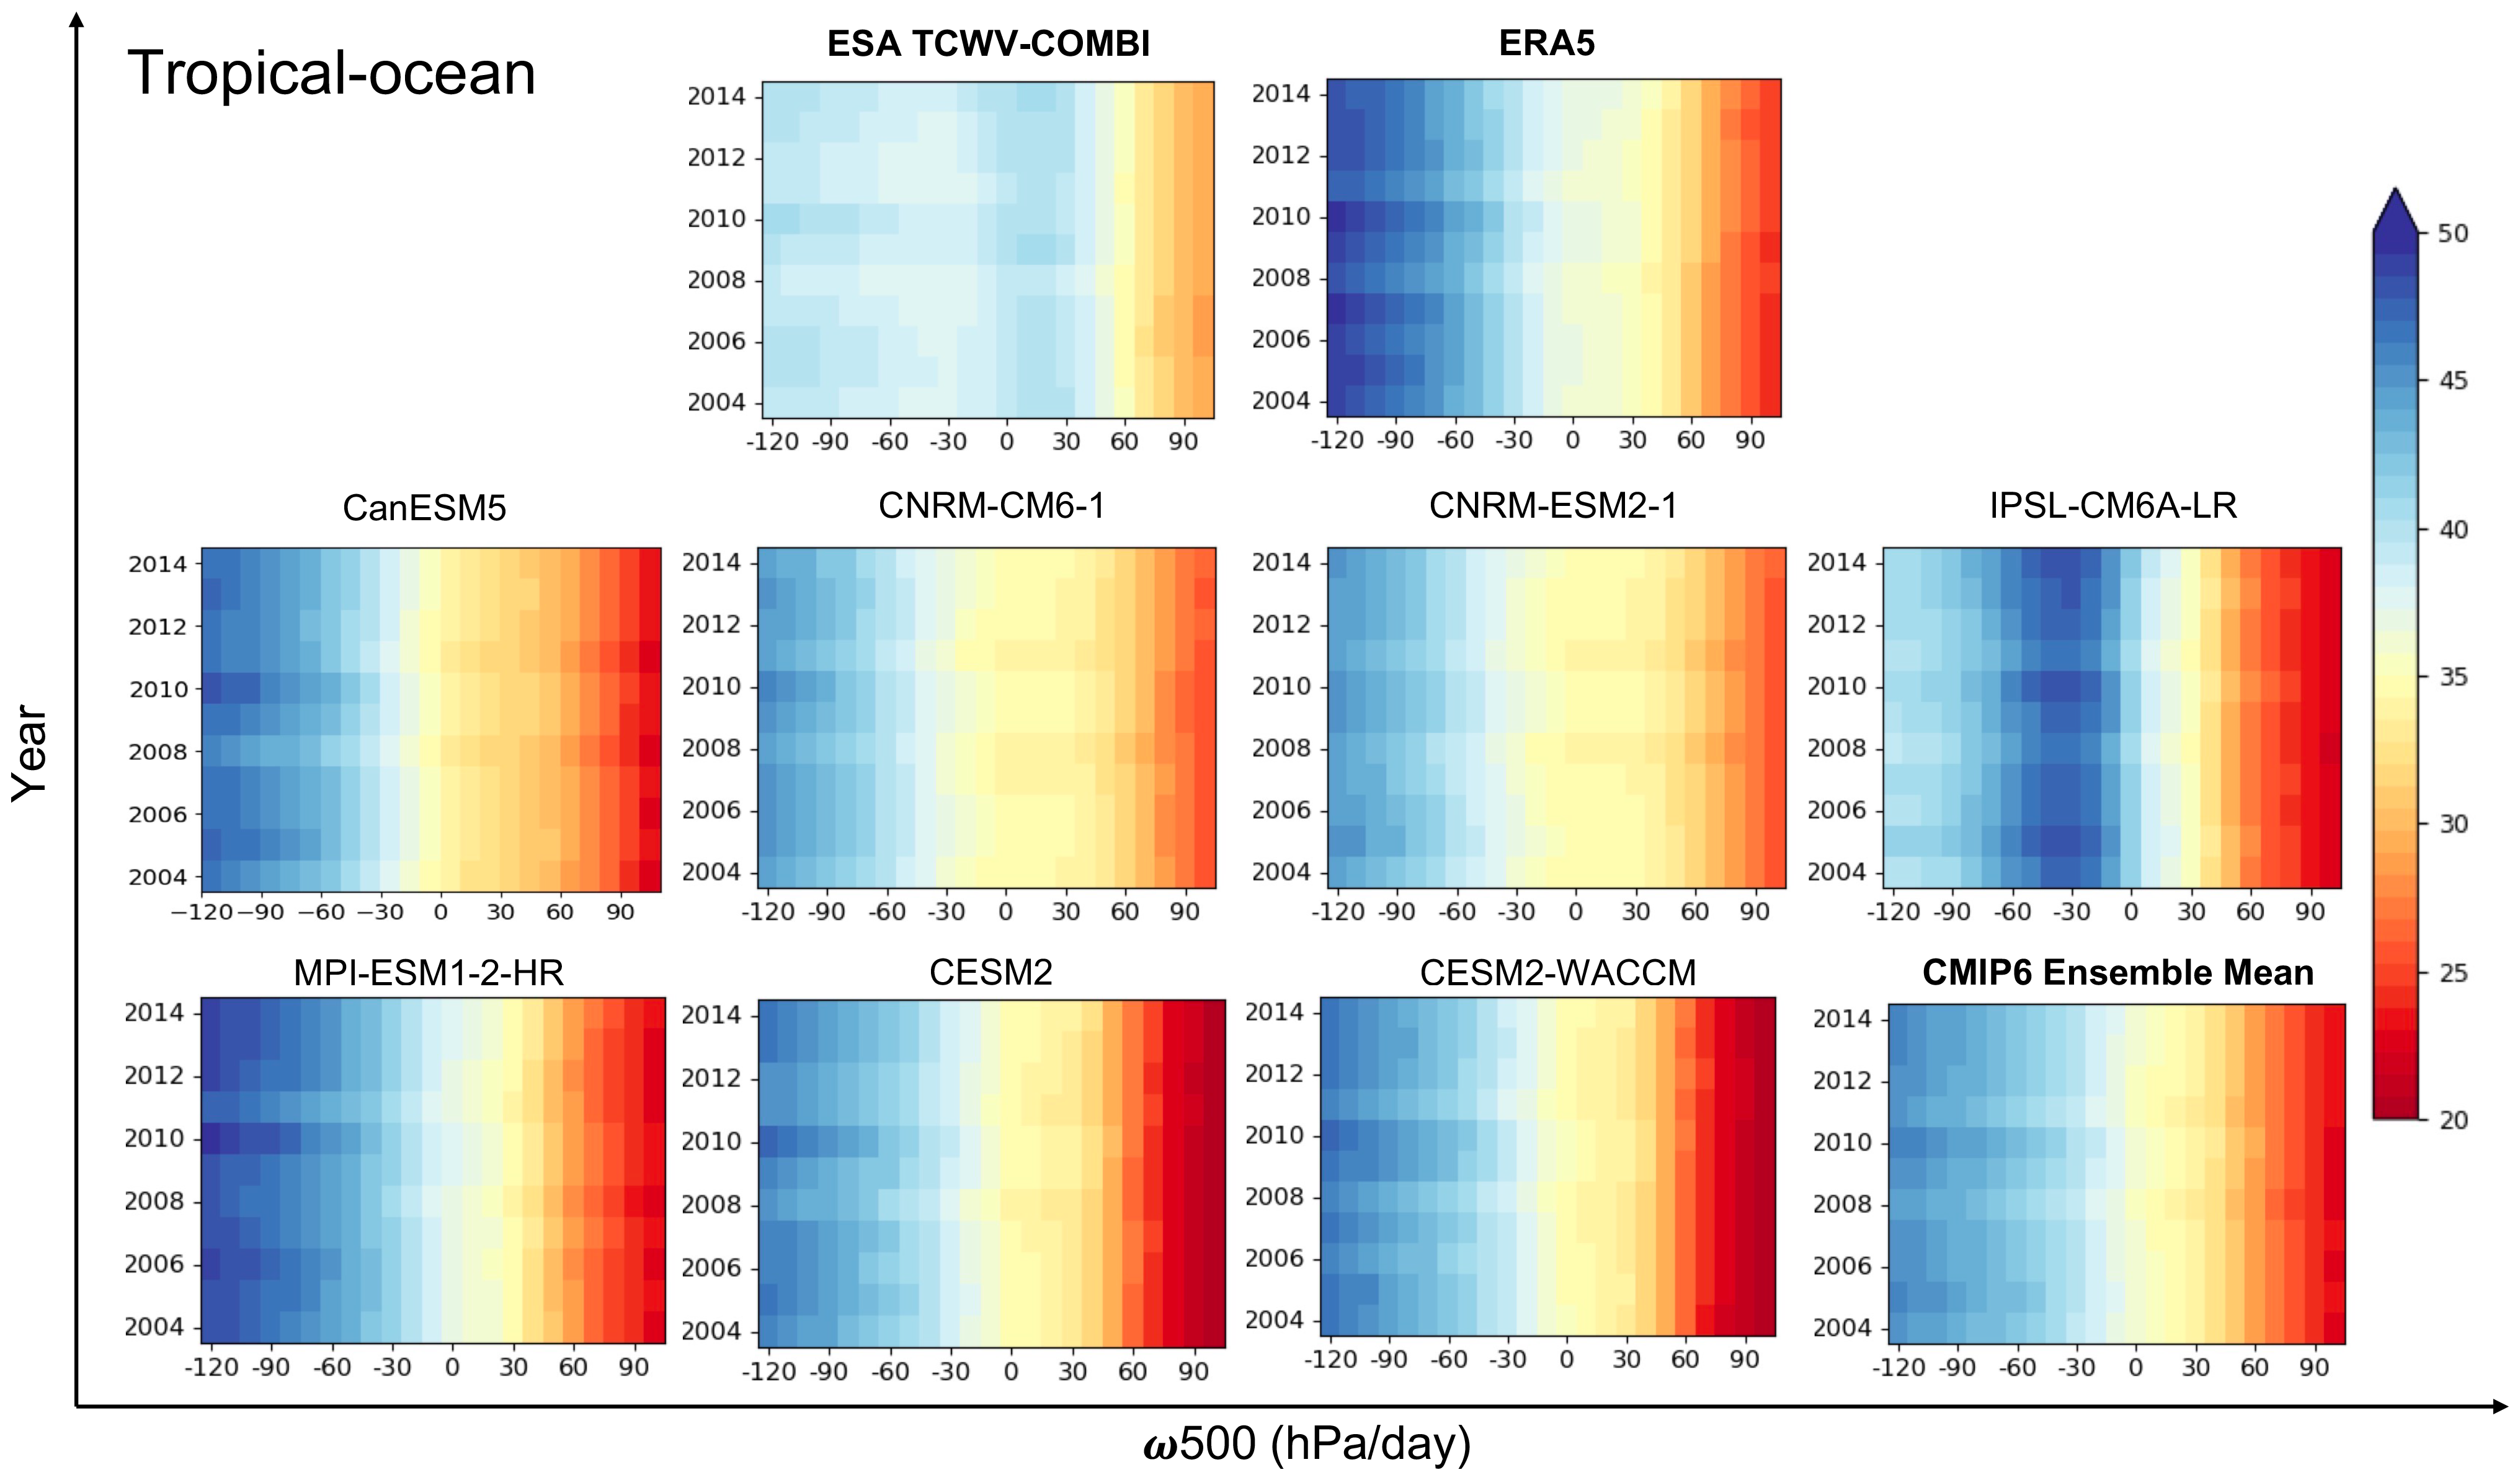 Acp Evaluation Of Tropical Water Vapour From Cmip6 Global Climate Models Using The Esa Cci Water Vapour Climate Data Records